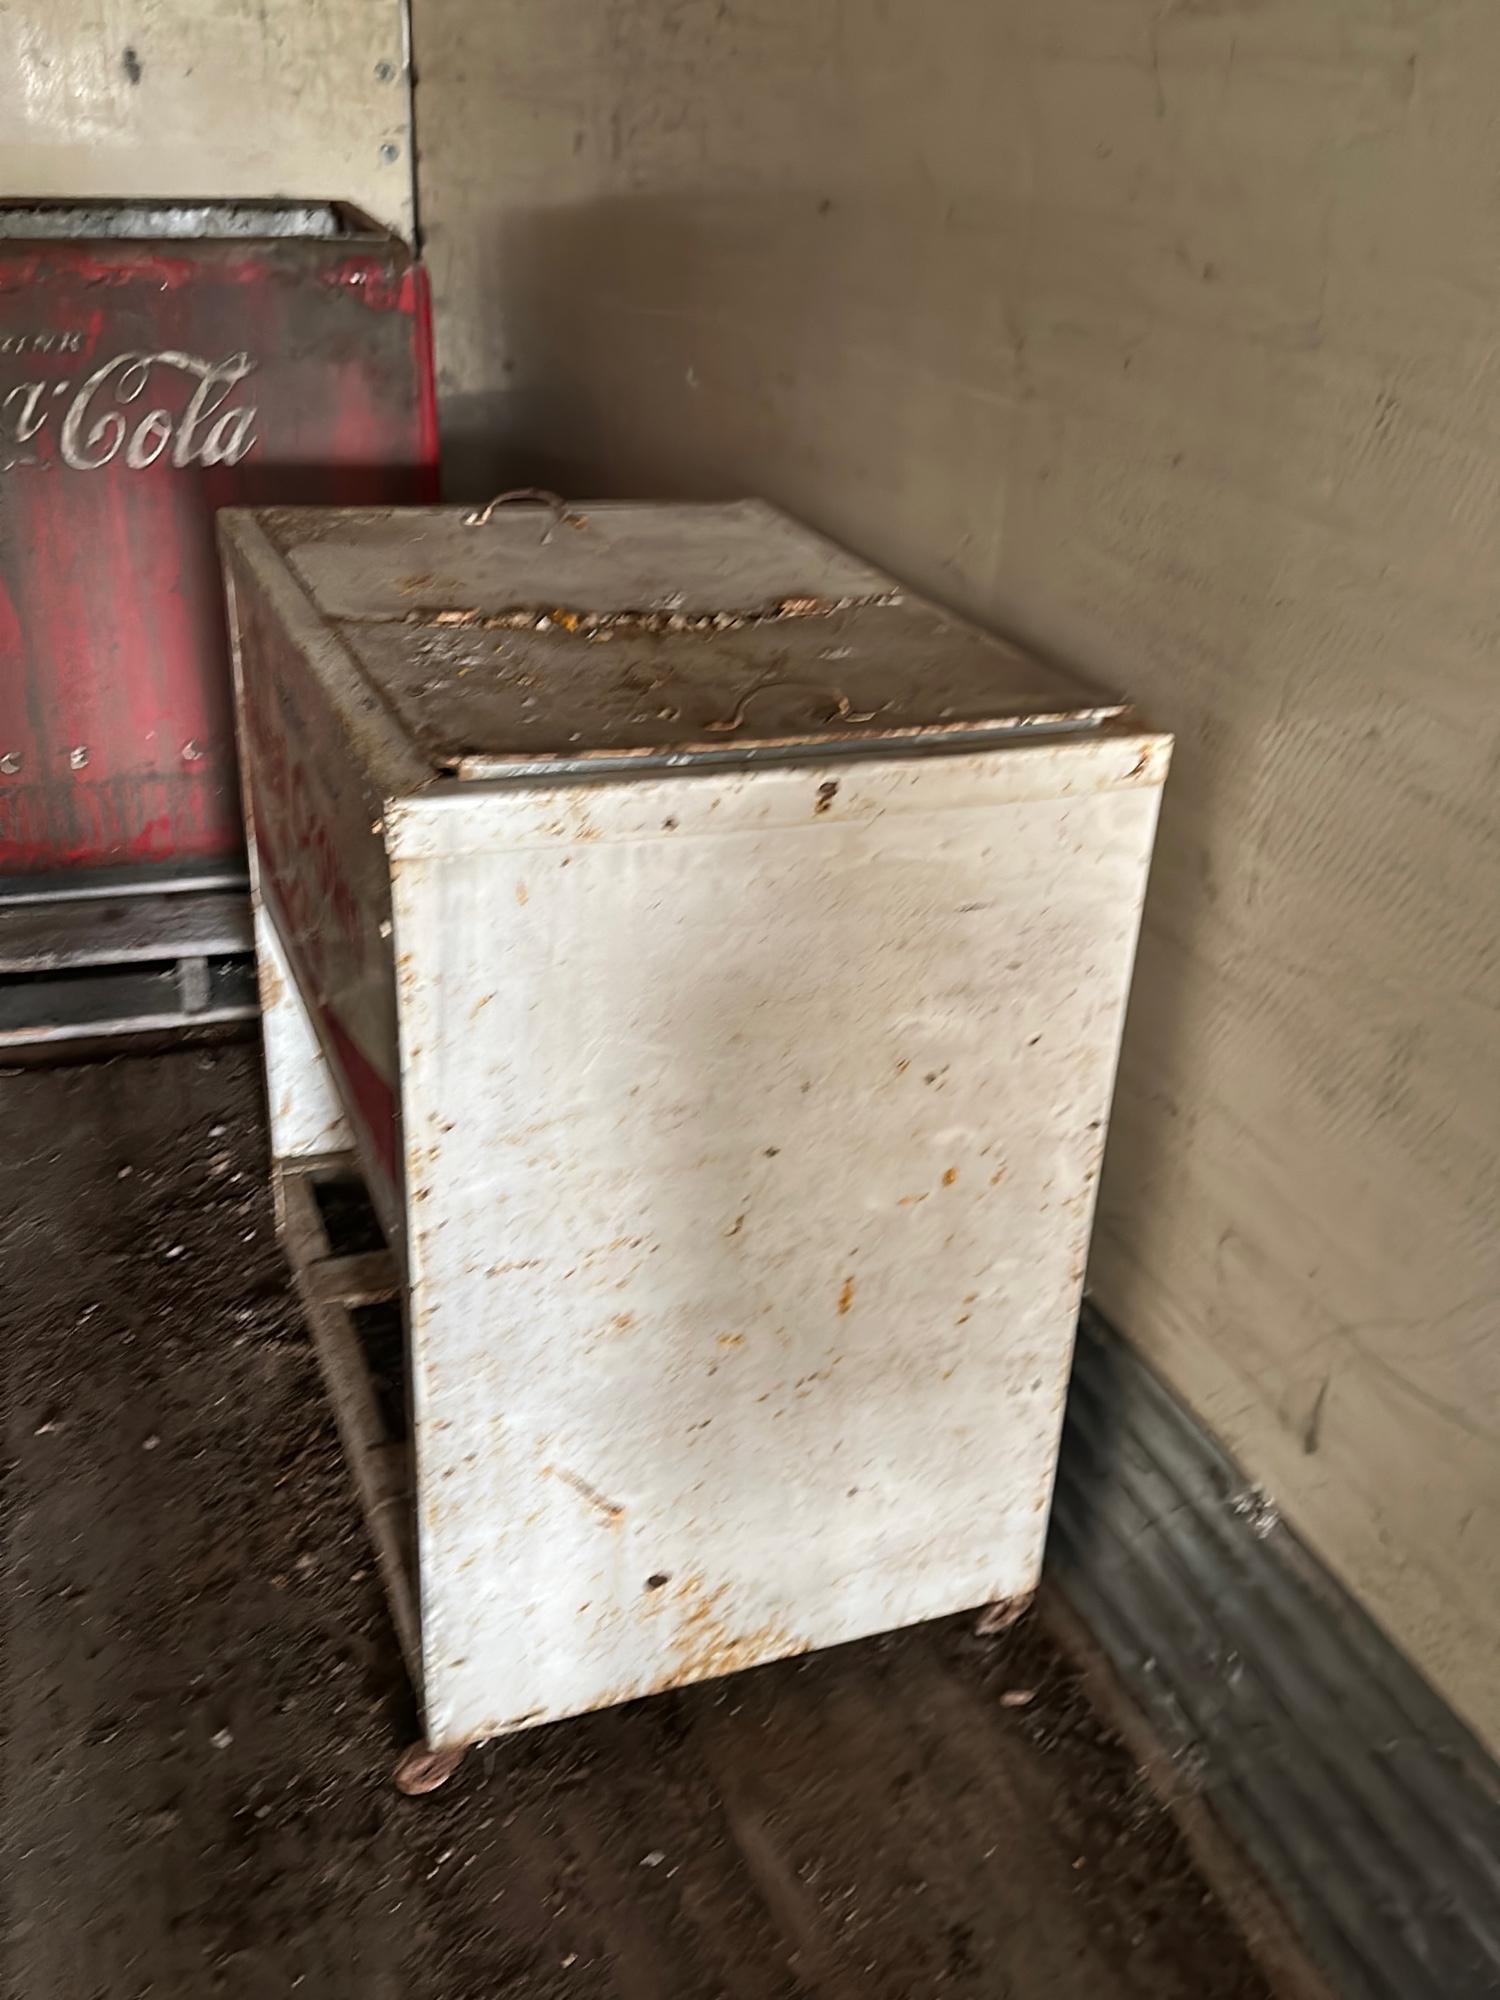 Royal Crown Cola Ice Chest